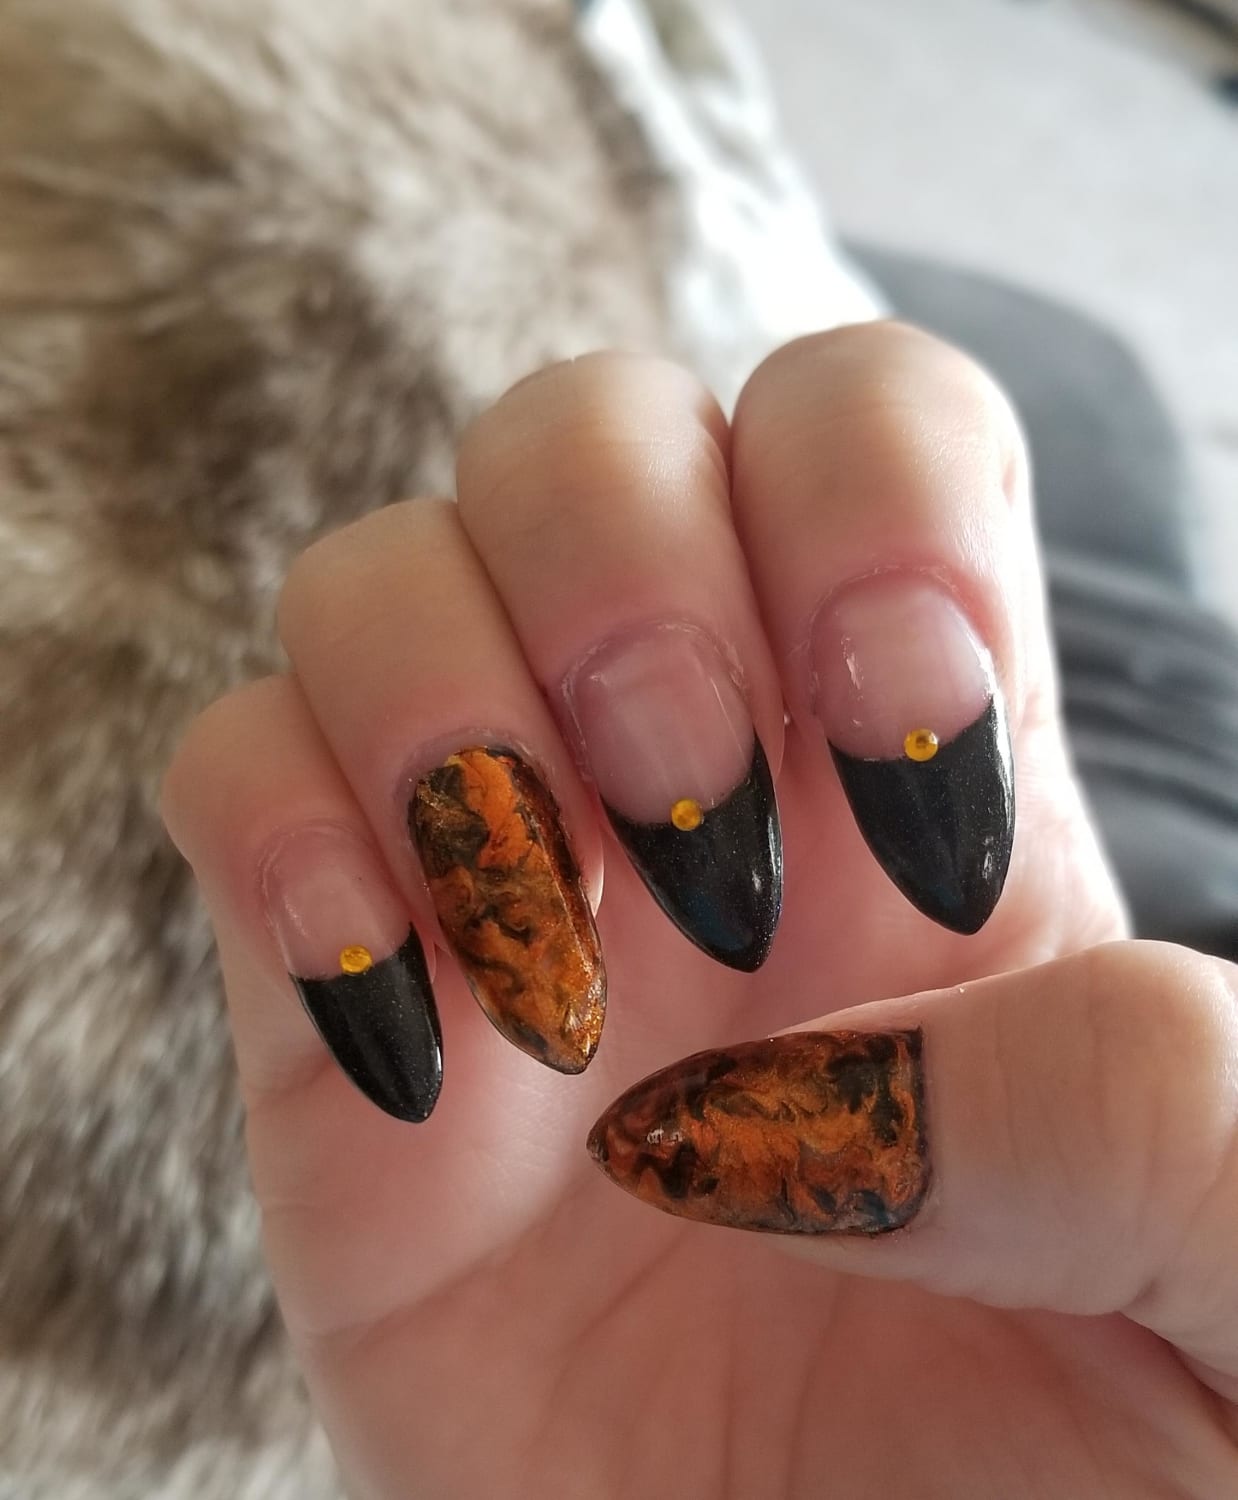 When you want spooky season now! Hot Topic "Midnight Galaxy", Kleancolor "Metallic Yellow", and Kleancolor "Metallic Orange" with generic rhinestones from Wish